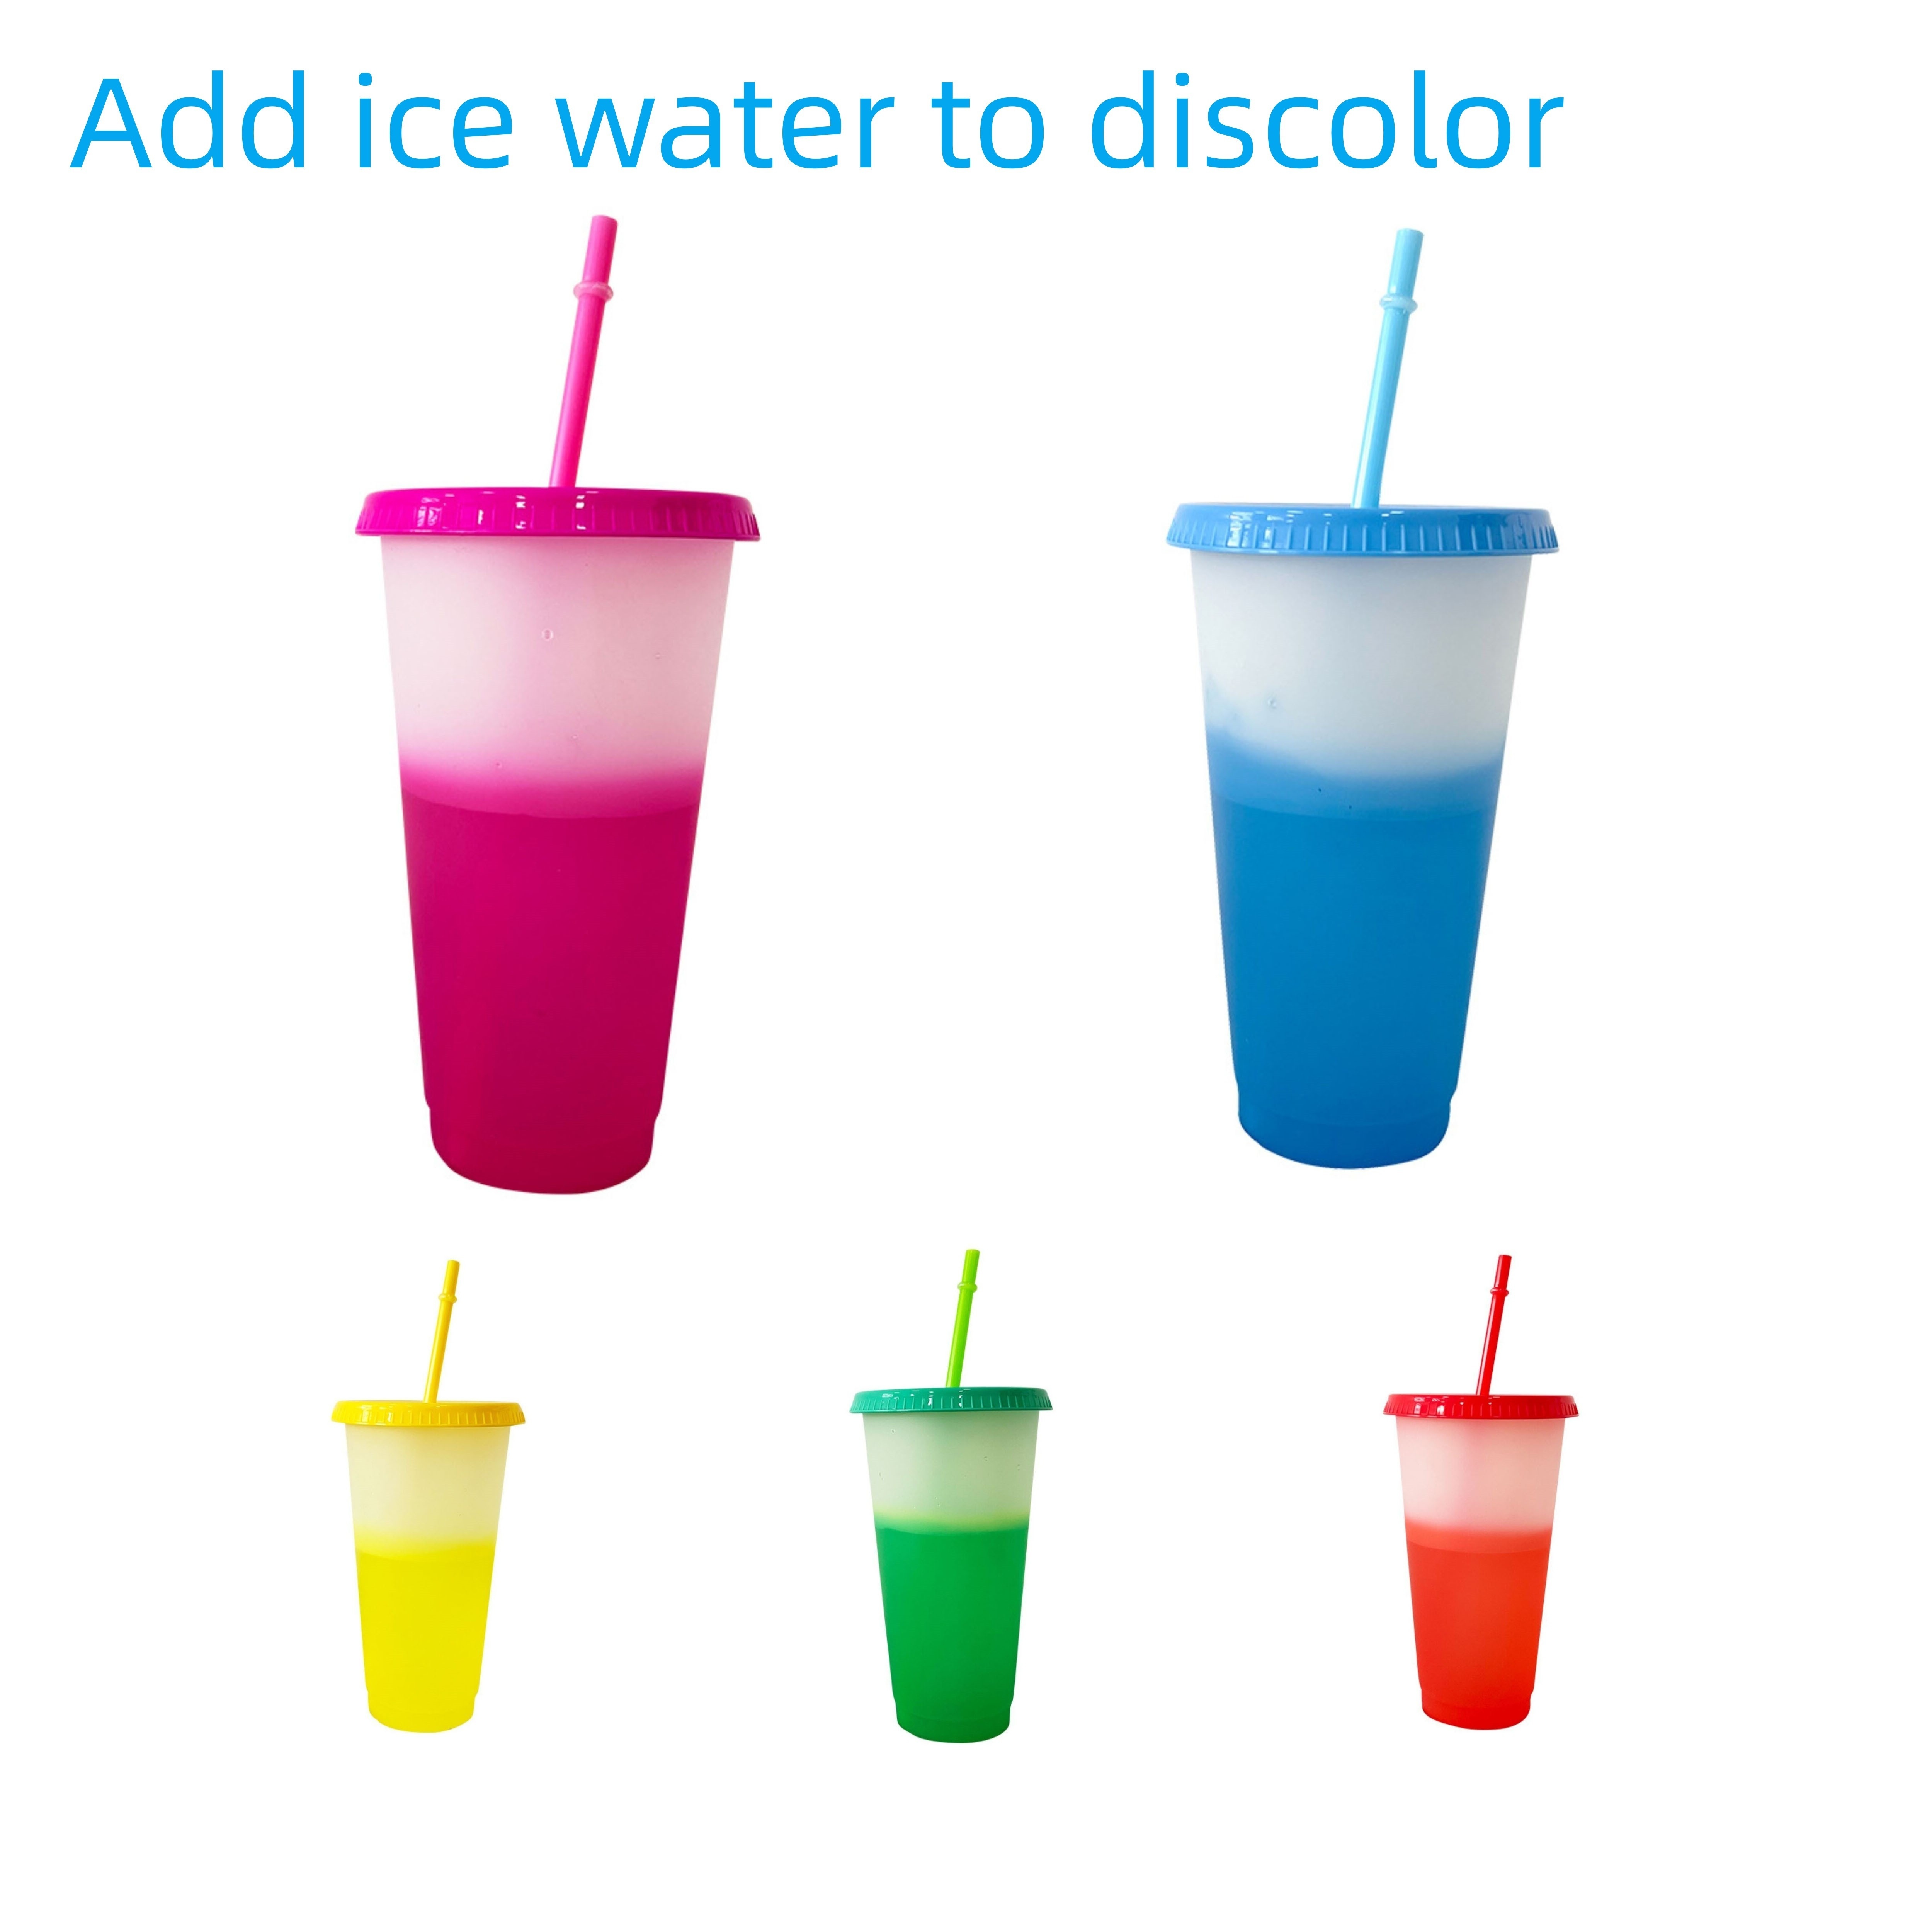 7pcs Color Changing Cups, 32oz Reusable Plastic Cold Drink Cups with Lids  and Straws BPA Free Adult Kids Summer Coffee Tumblers Party Cup